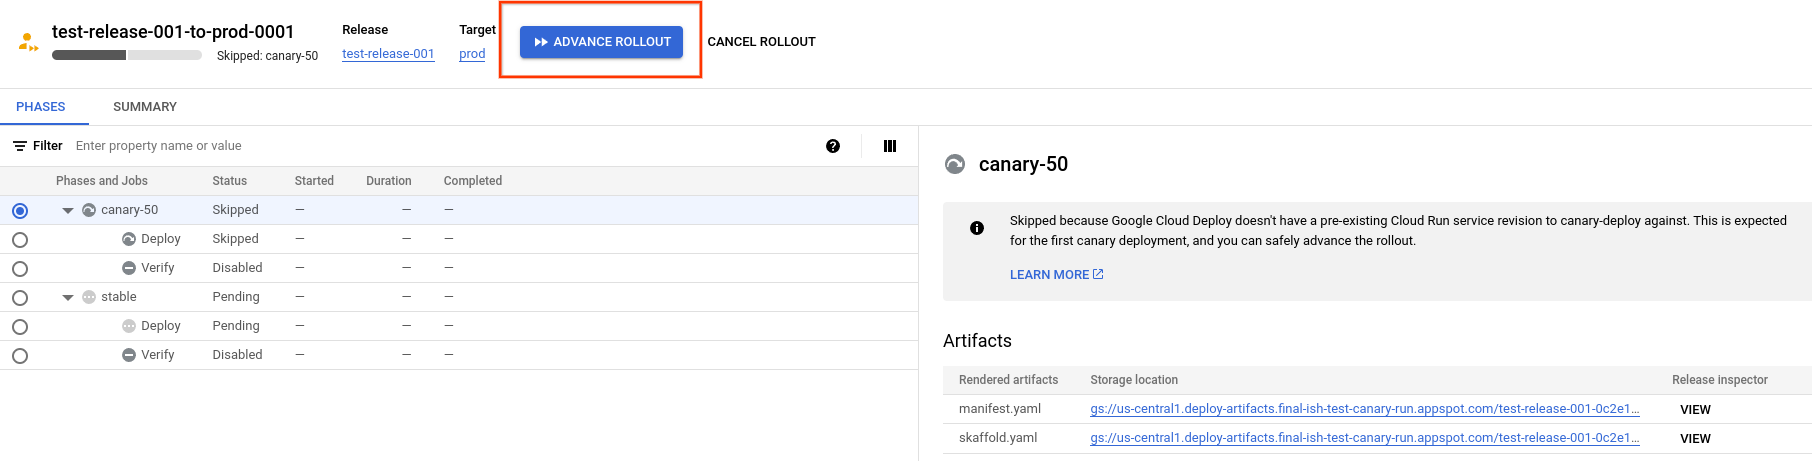 rollout details in Google Cloud console 